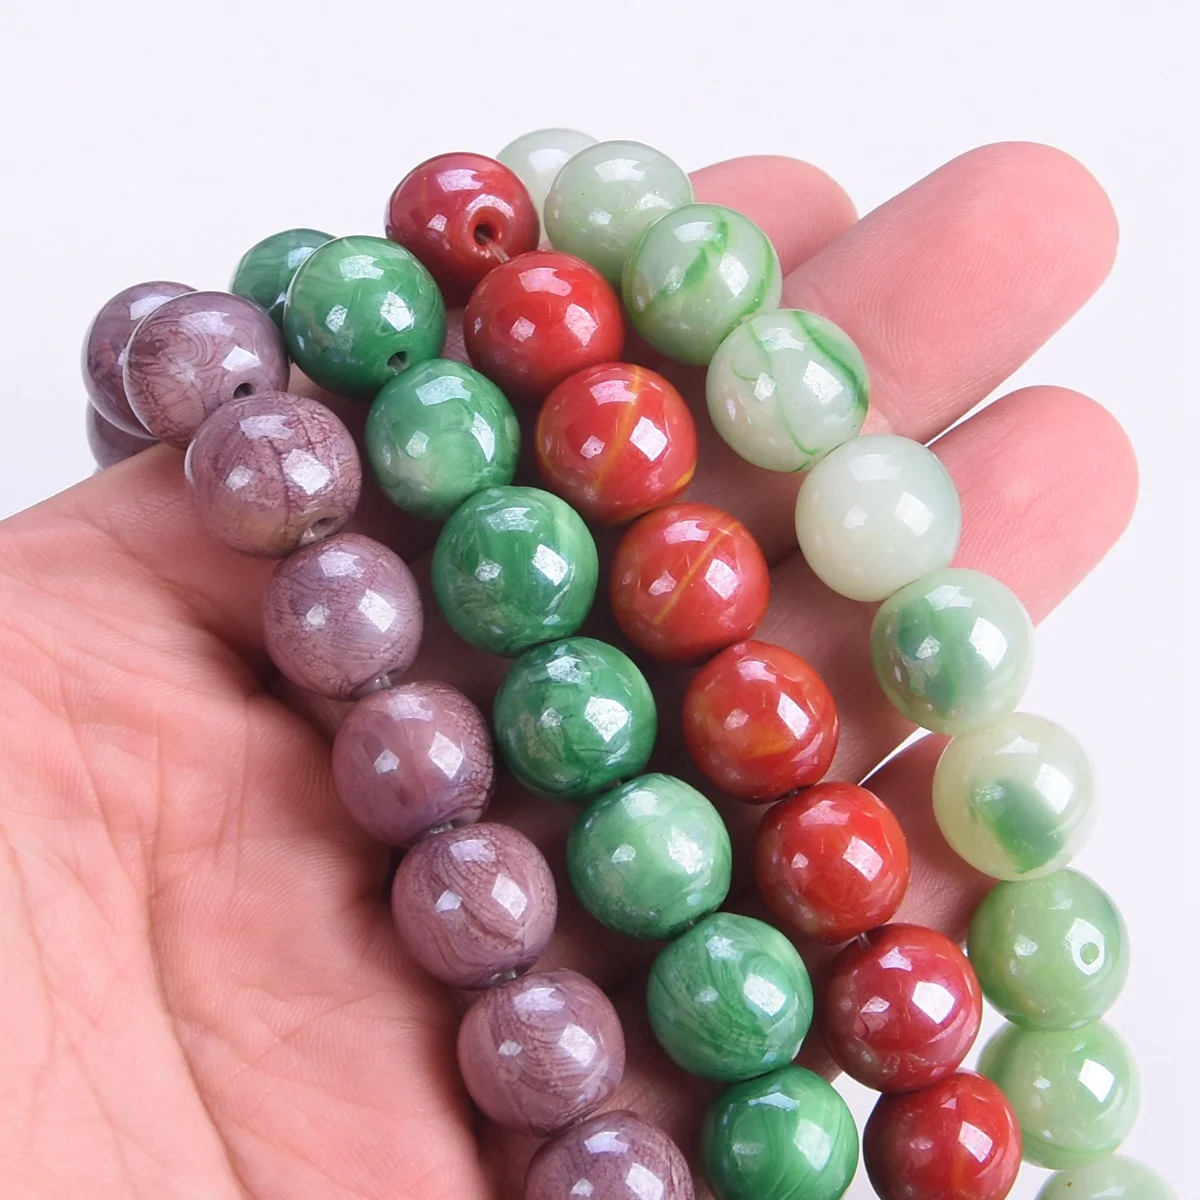 10pcs 14mm Round Jade Like Opaque Lampwork Glass Loose Crafts Beads For Jewelry Making DIY Bracelet Findings handicrafts jewelry necklace mold diy crafts bracelet pendant silicone mould handmade moth for key chain resin casting m